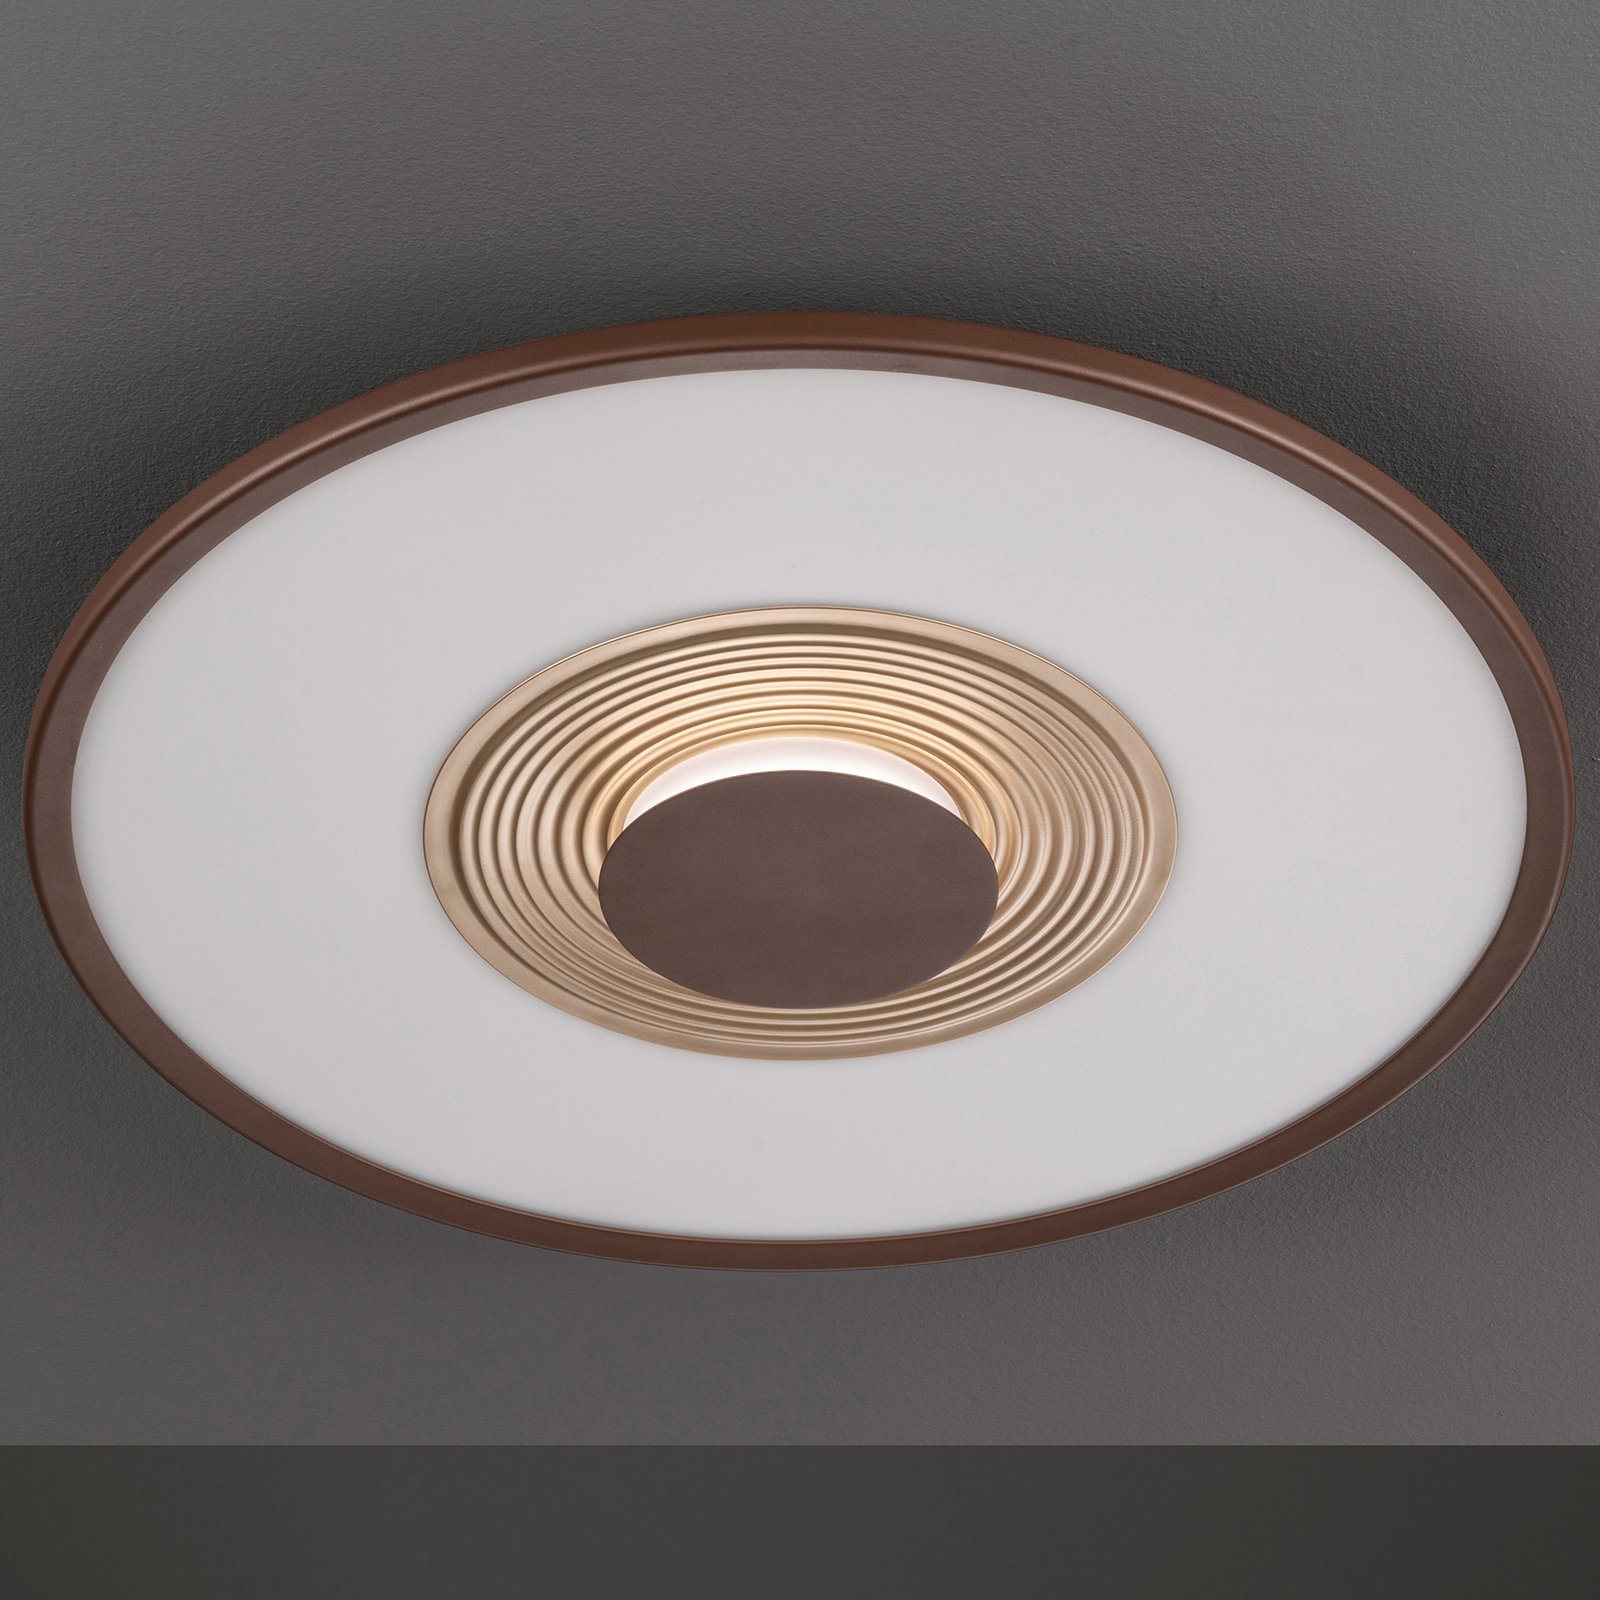 Veit CCT LED ceiling lamp with remote control